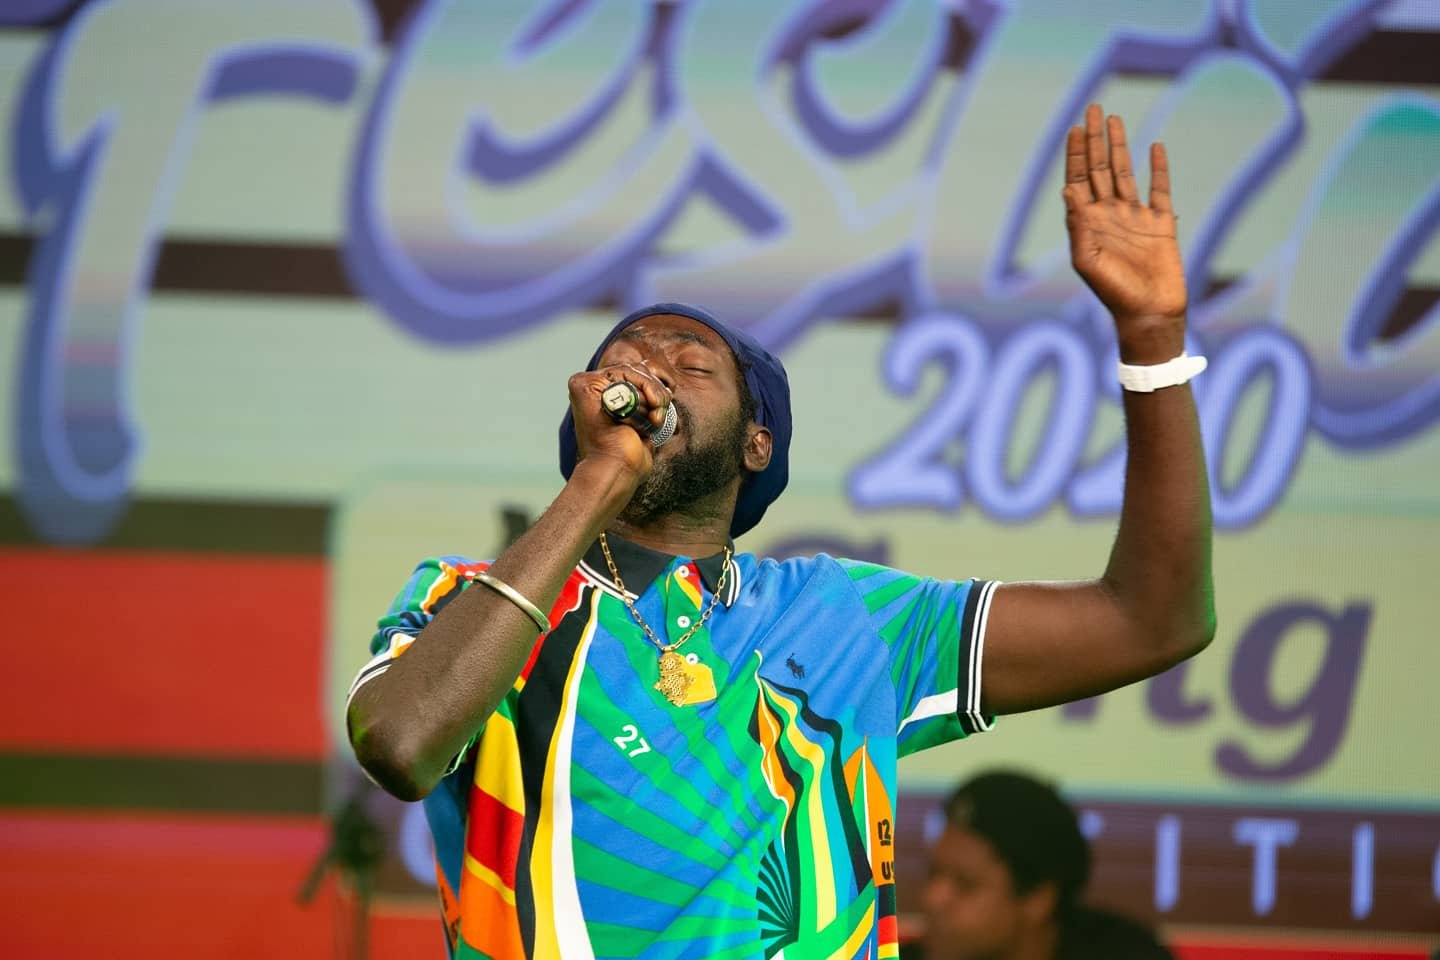 Buju Banton Wins Jamaica Festival Song Competition With 'I Am A